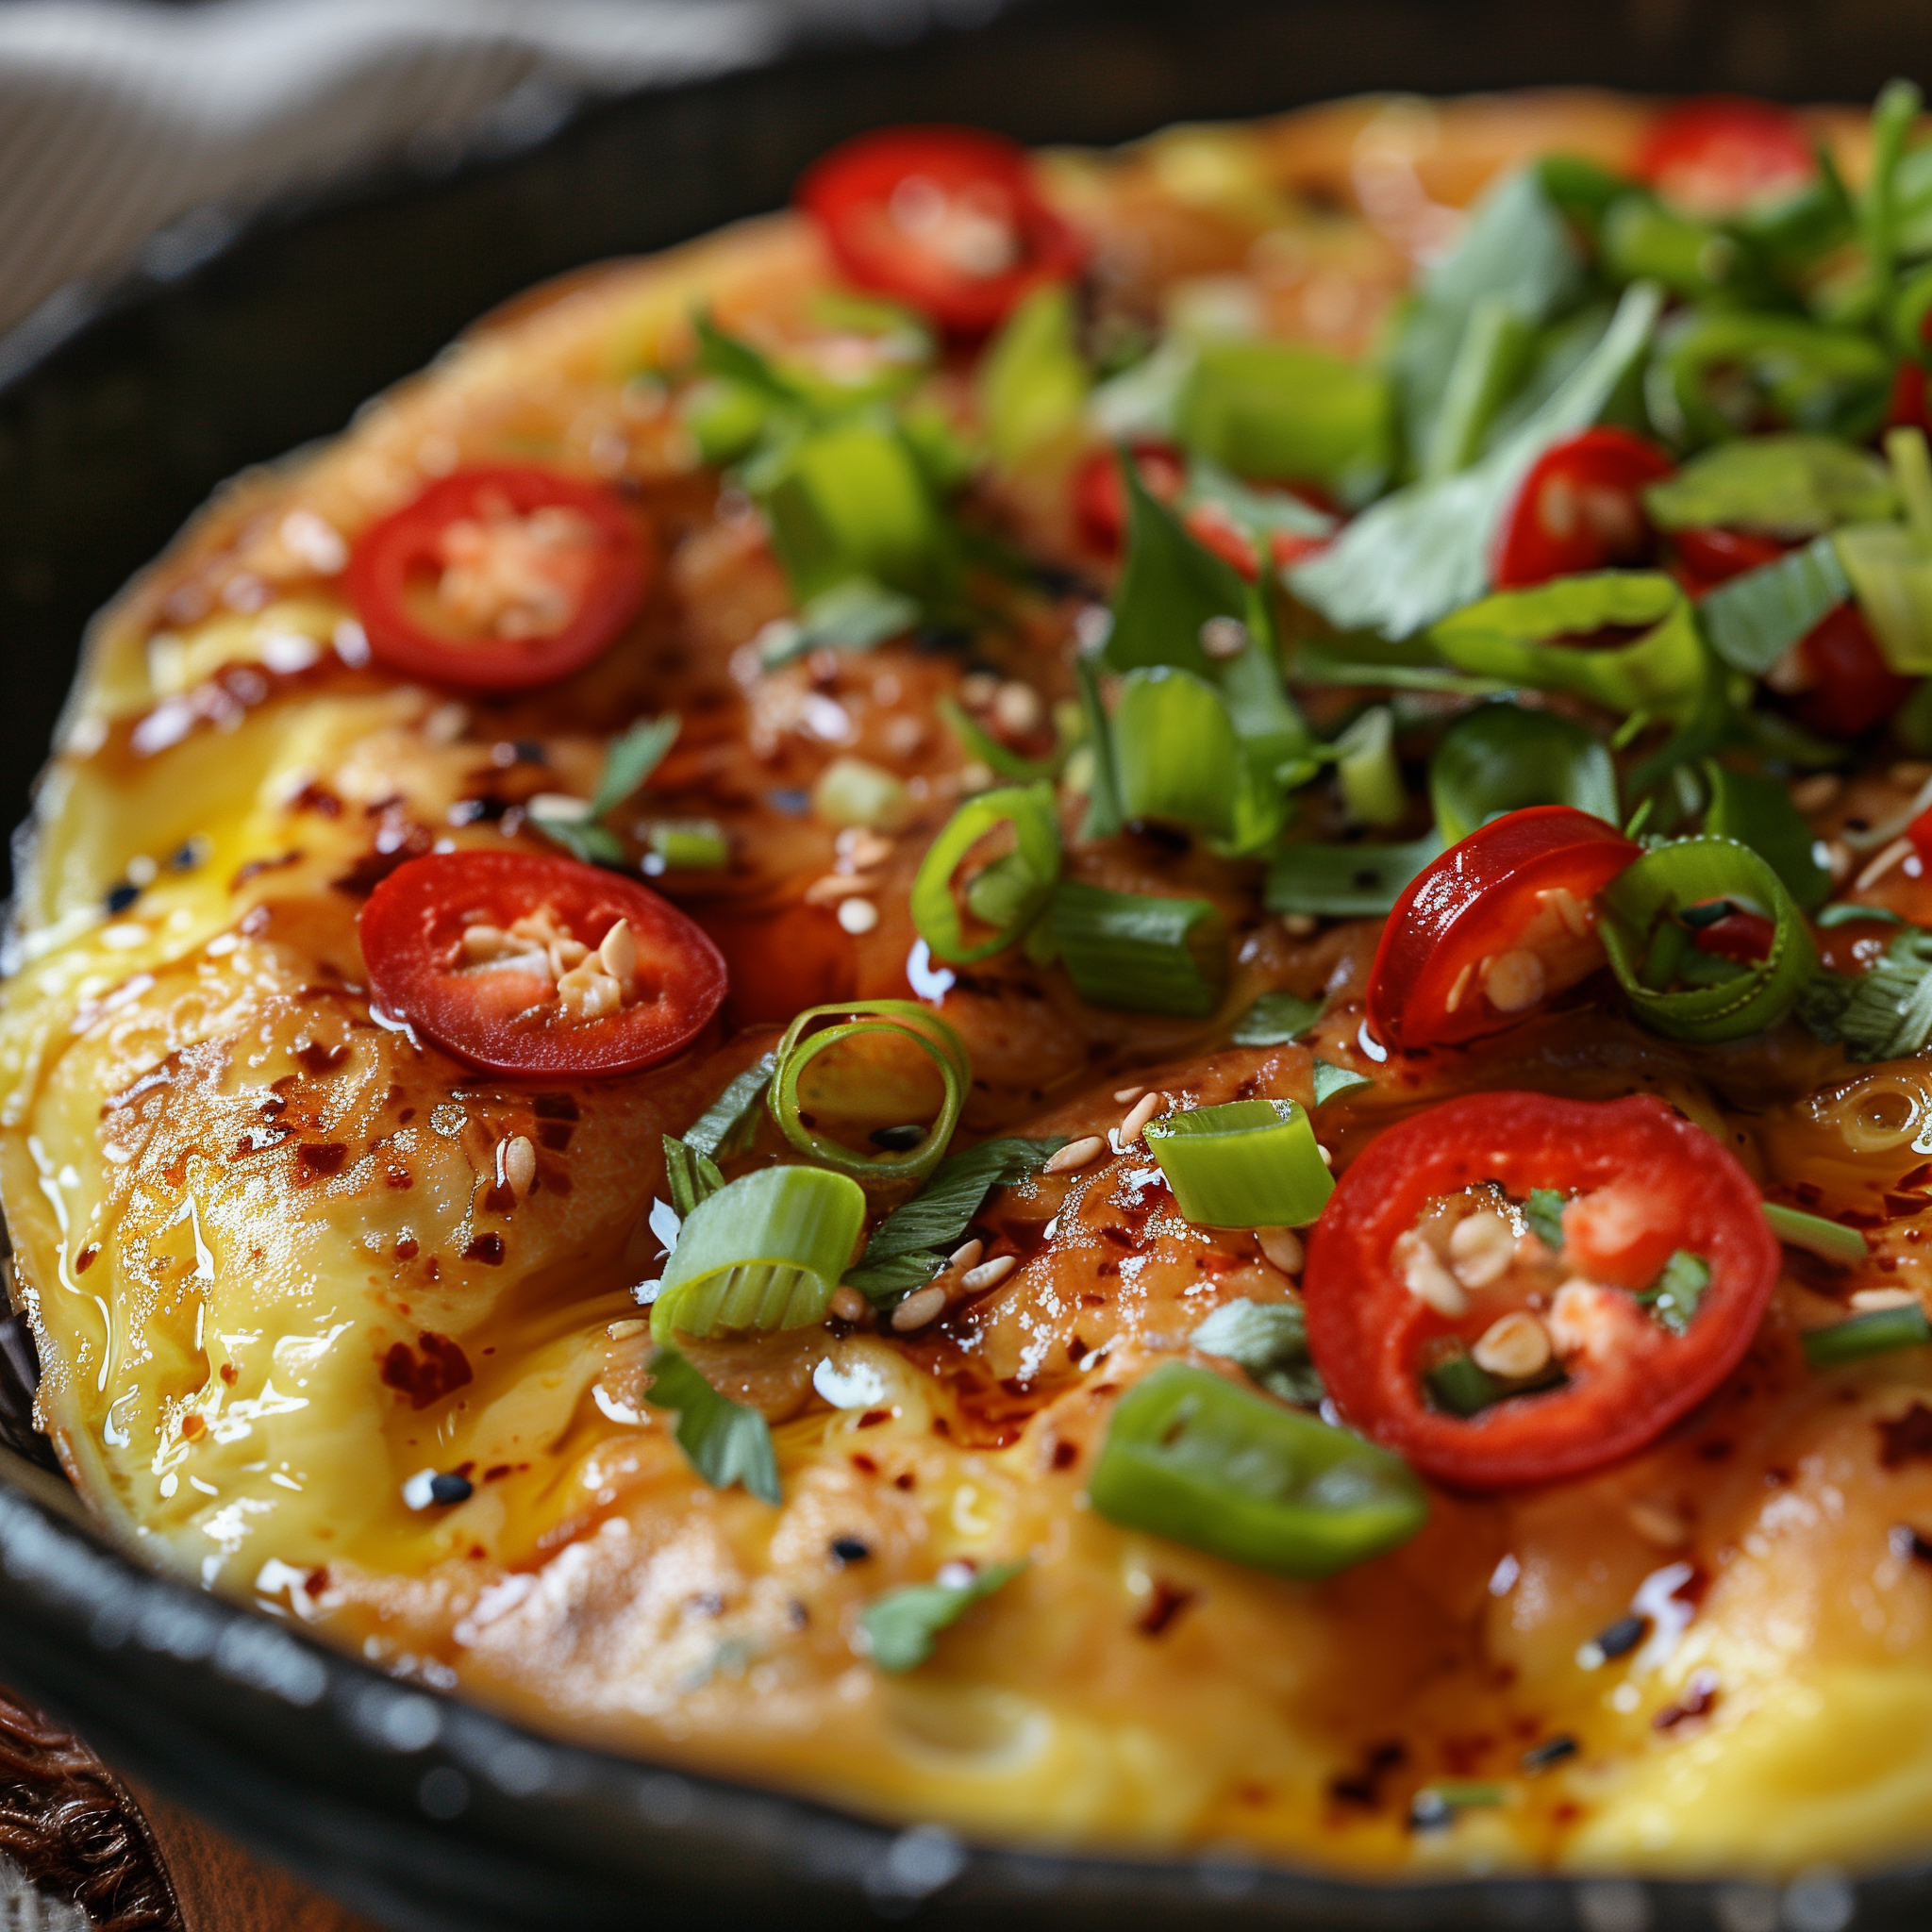 Close-up of a savory omelette garnished with sliced red chili and green onions, ideal for a food-themed profile picture.